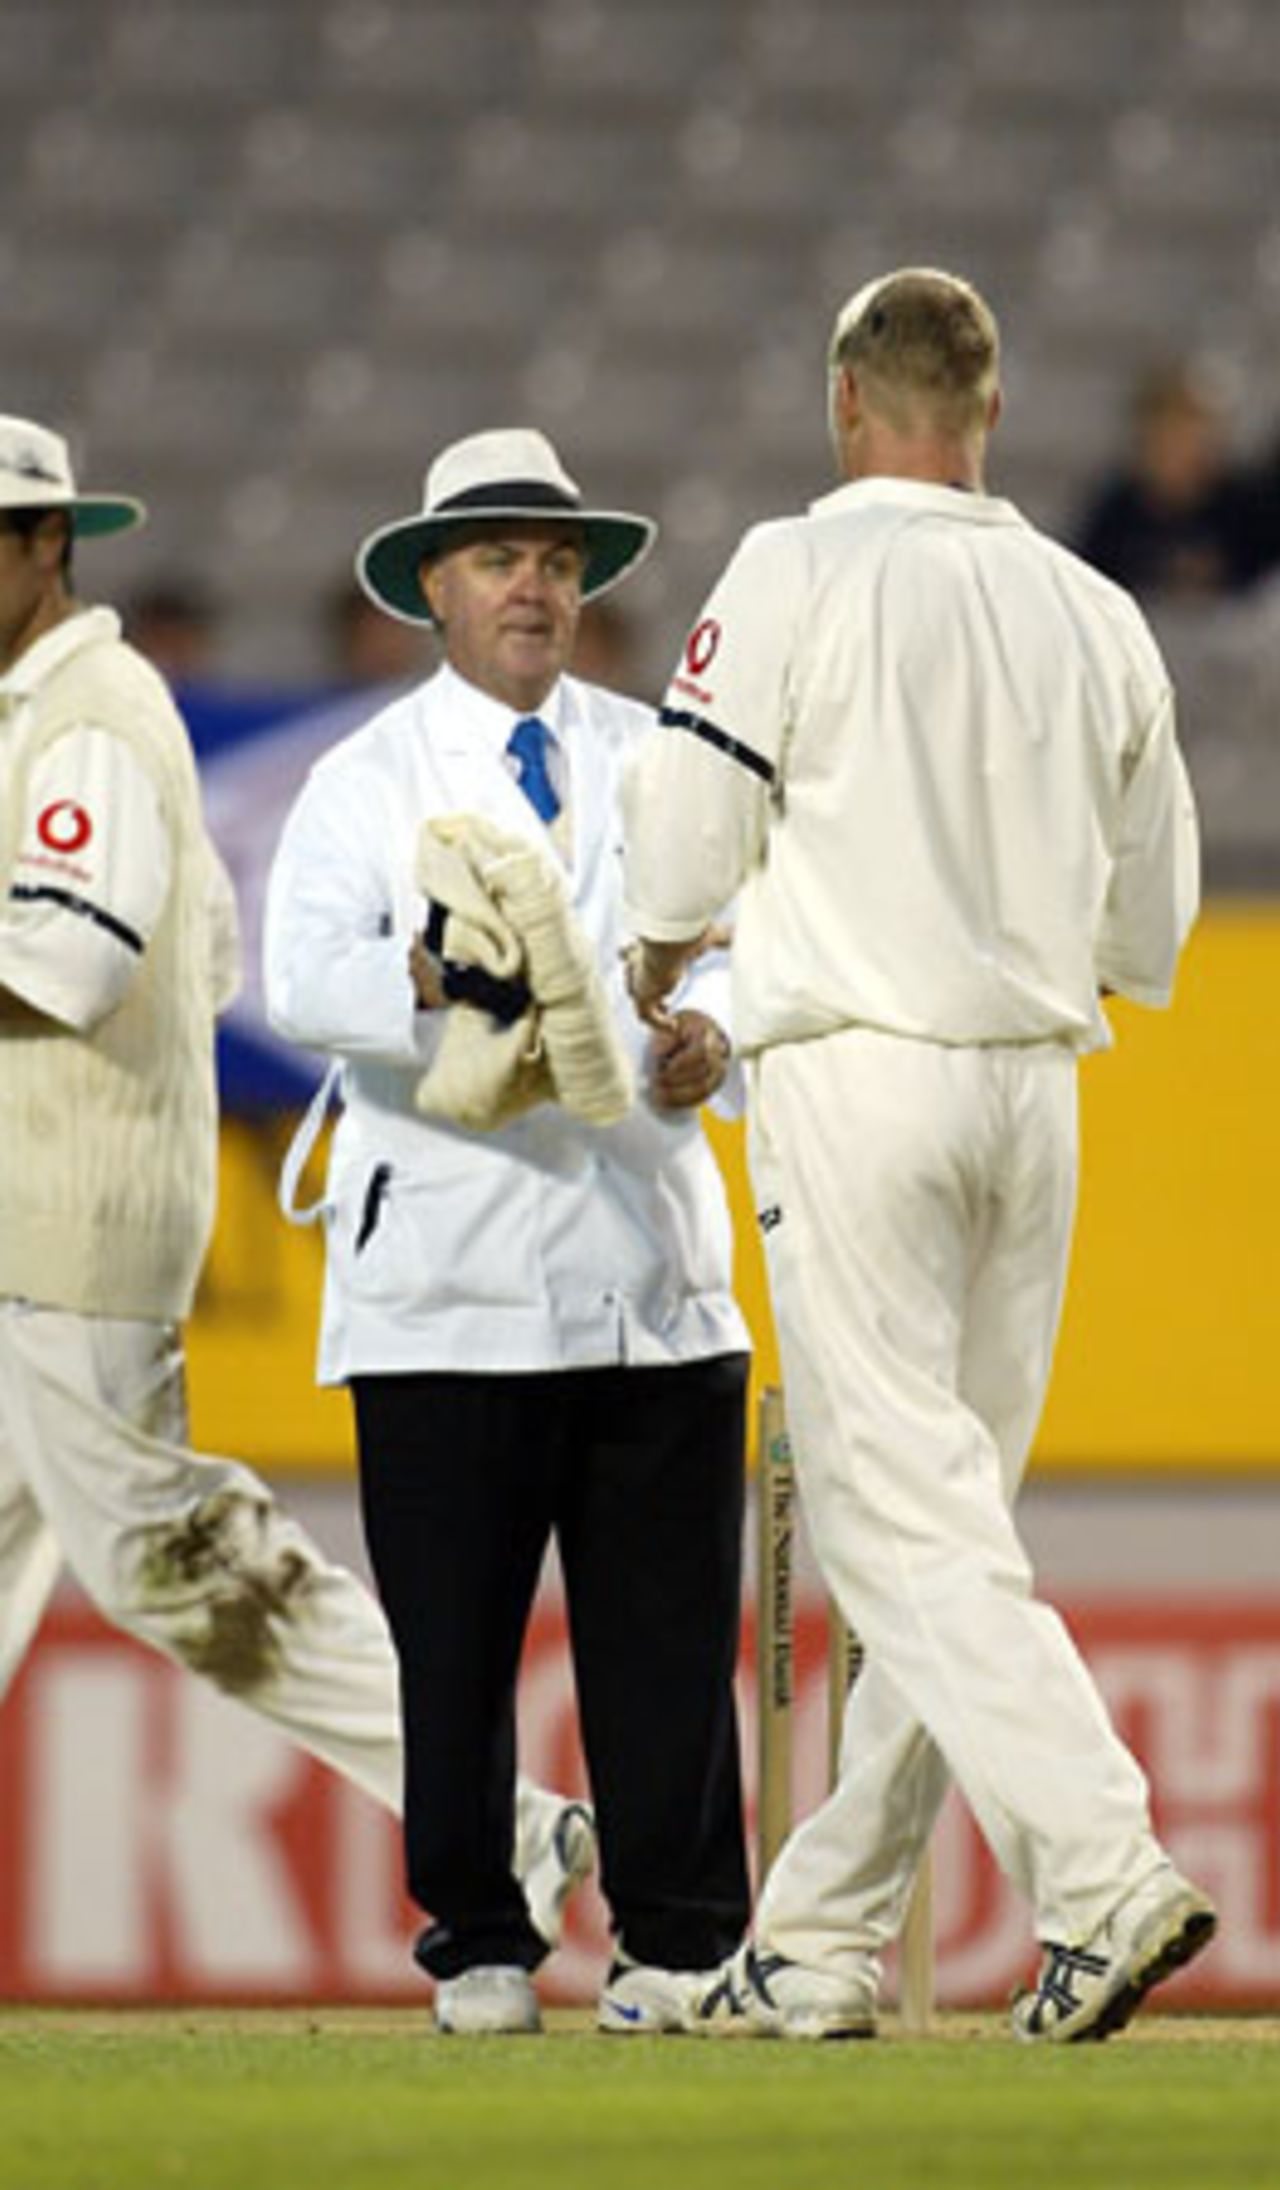 Umpire Doug Cowie hands back England bowler Andrew Flintoff his jersey at the end of an over. 3rd Test: New Zealand v England at Eden Park, Auckland, 30 March-3 April 2002 (2 April 2002).